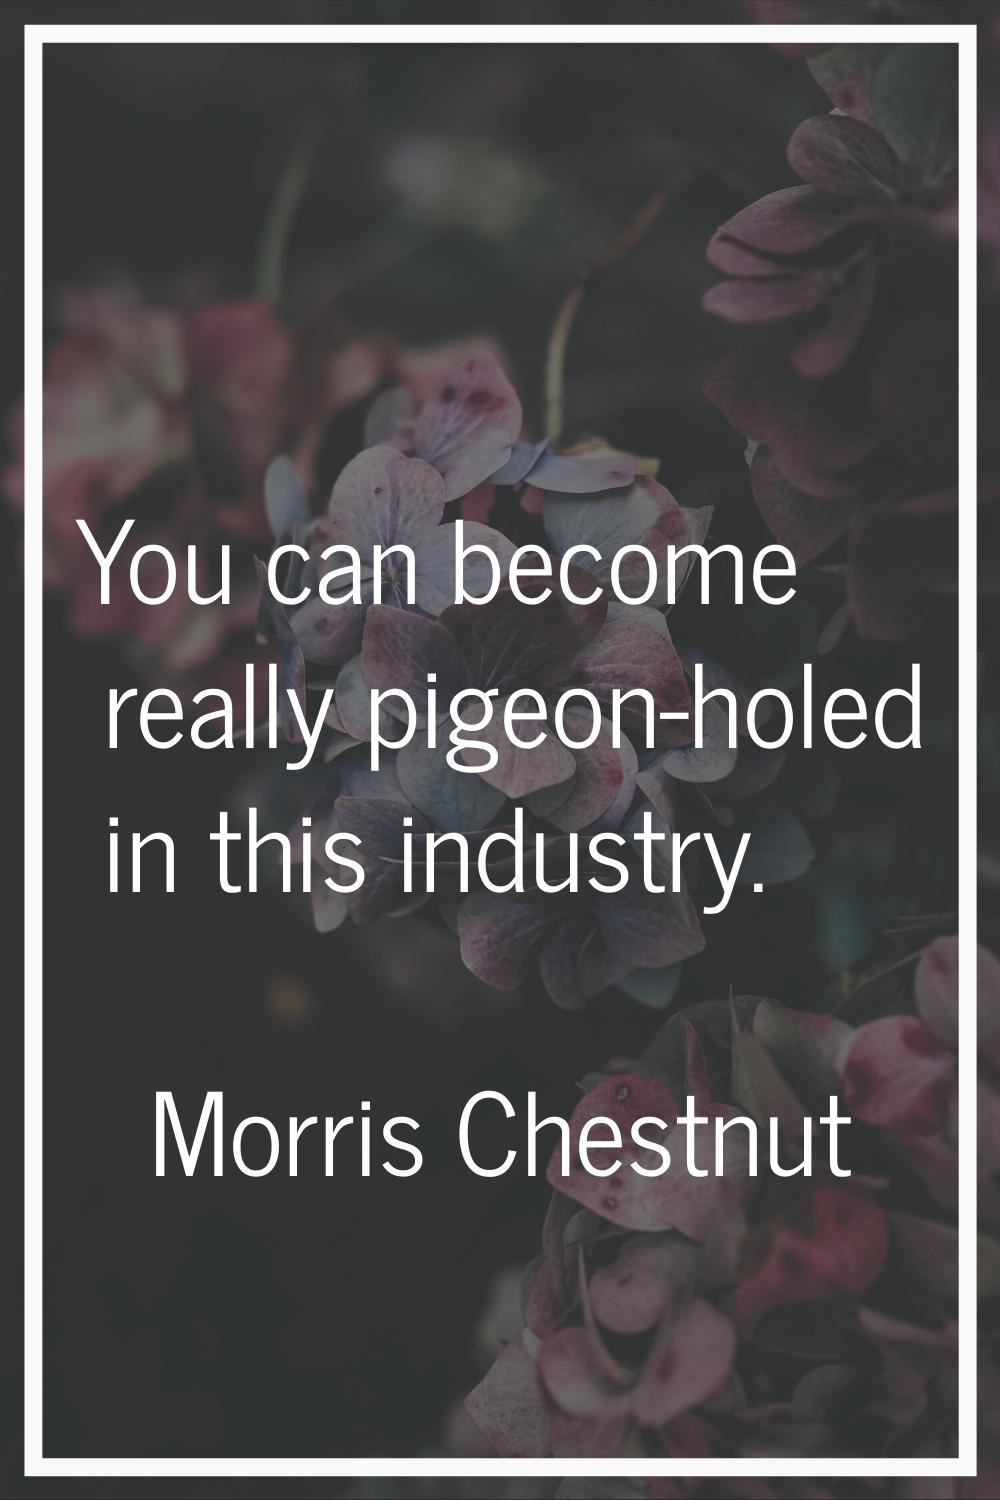 You can become really pigeon-holed in this industry.